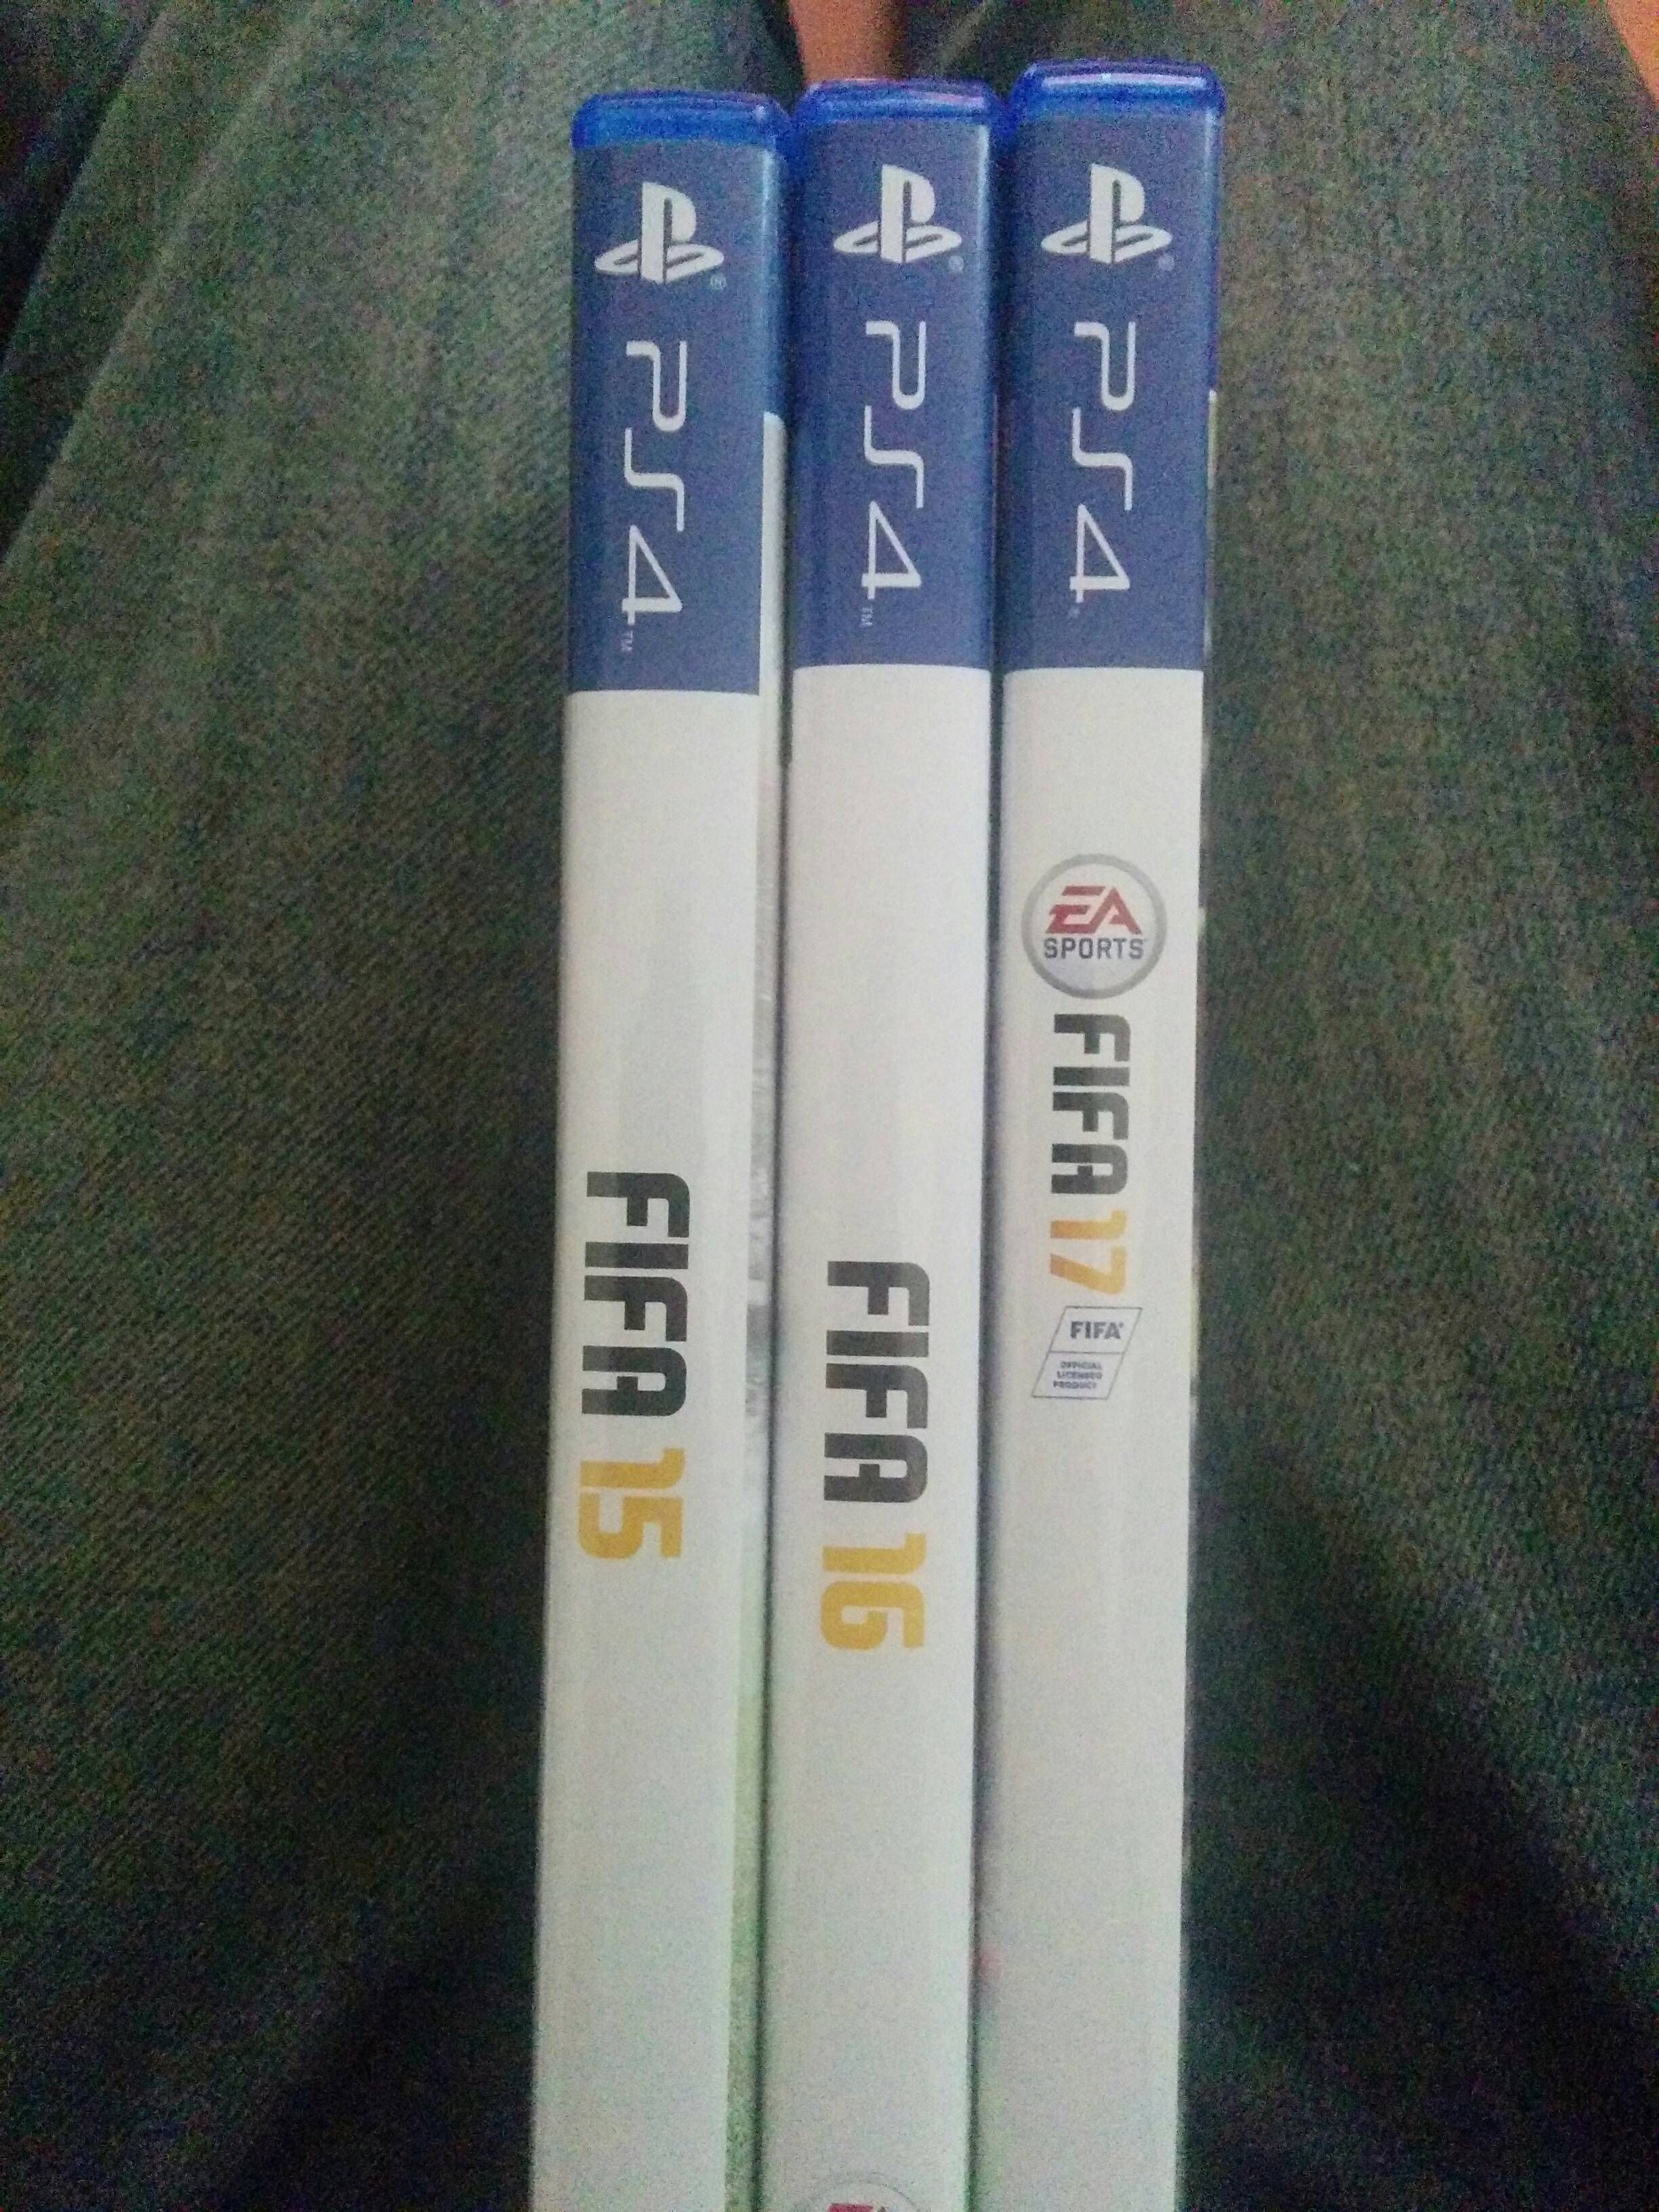 My collection is complete chaos now, EA.